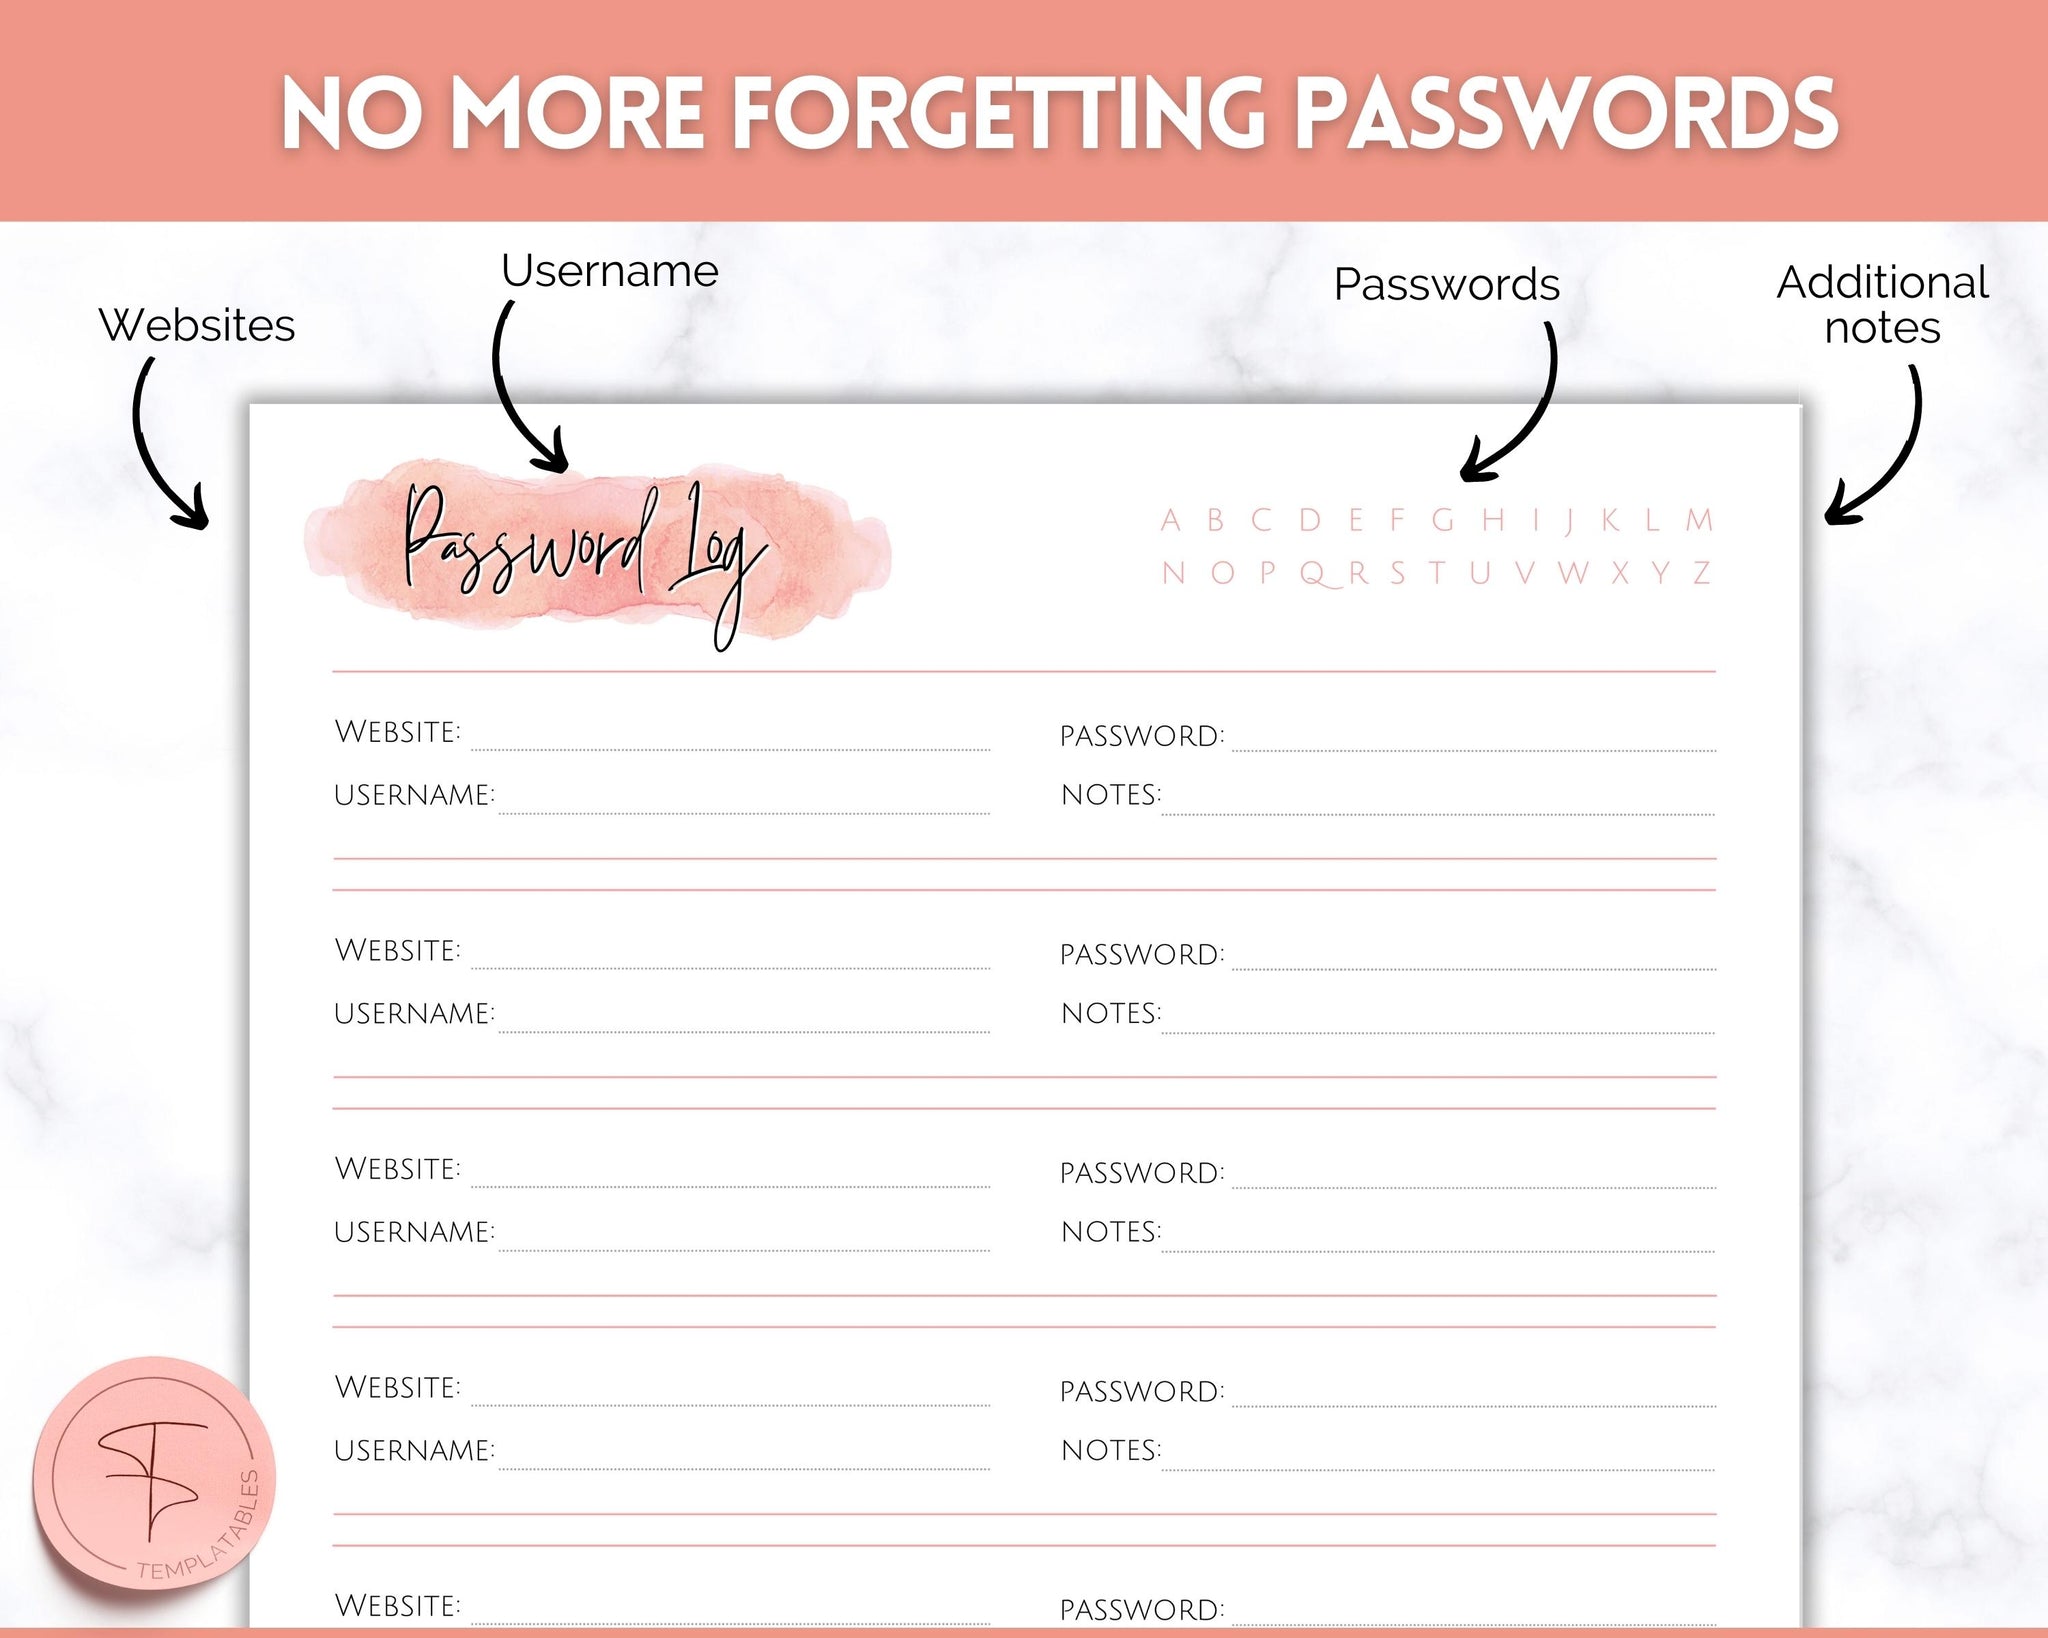 Pasword Tracker, Password Log for Personal Size Planners